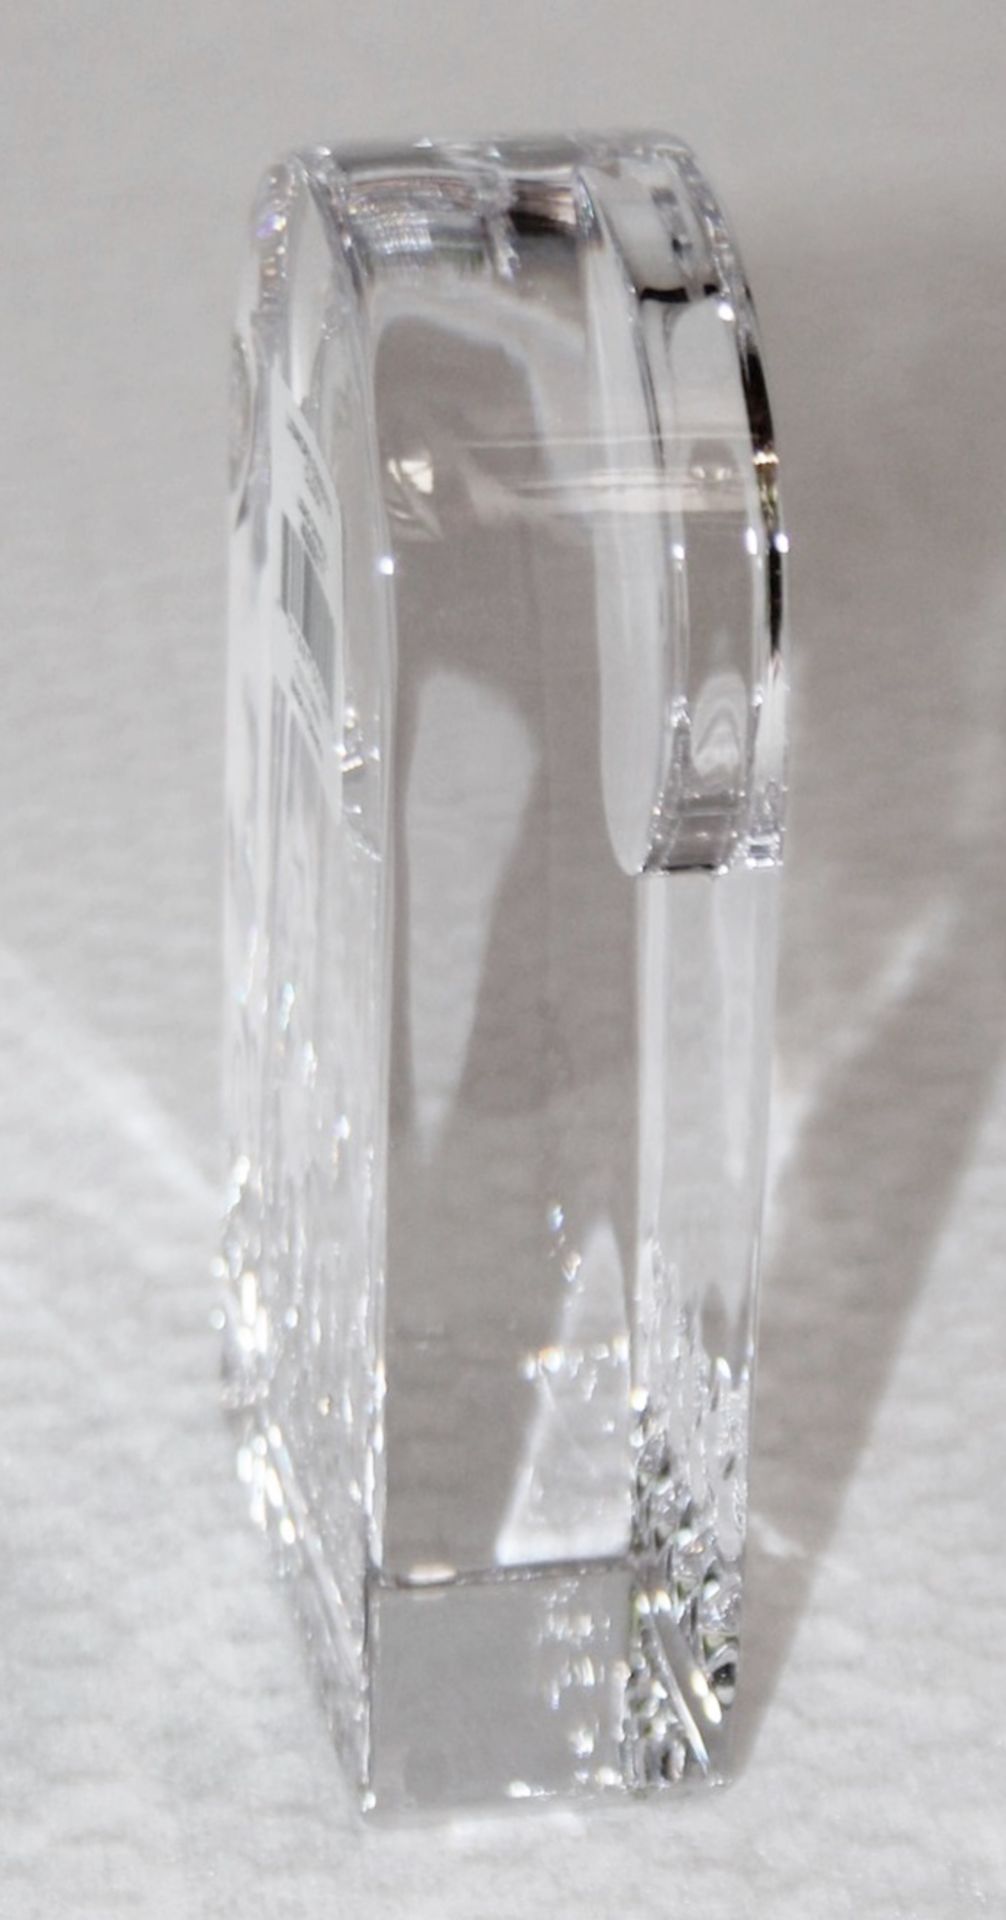 1 x WATERFORD 'Lismore' Essence Clock Mount (Crystal Section Only) - Original Price £155.00 - Unused - Image 9 of 12